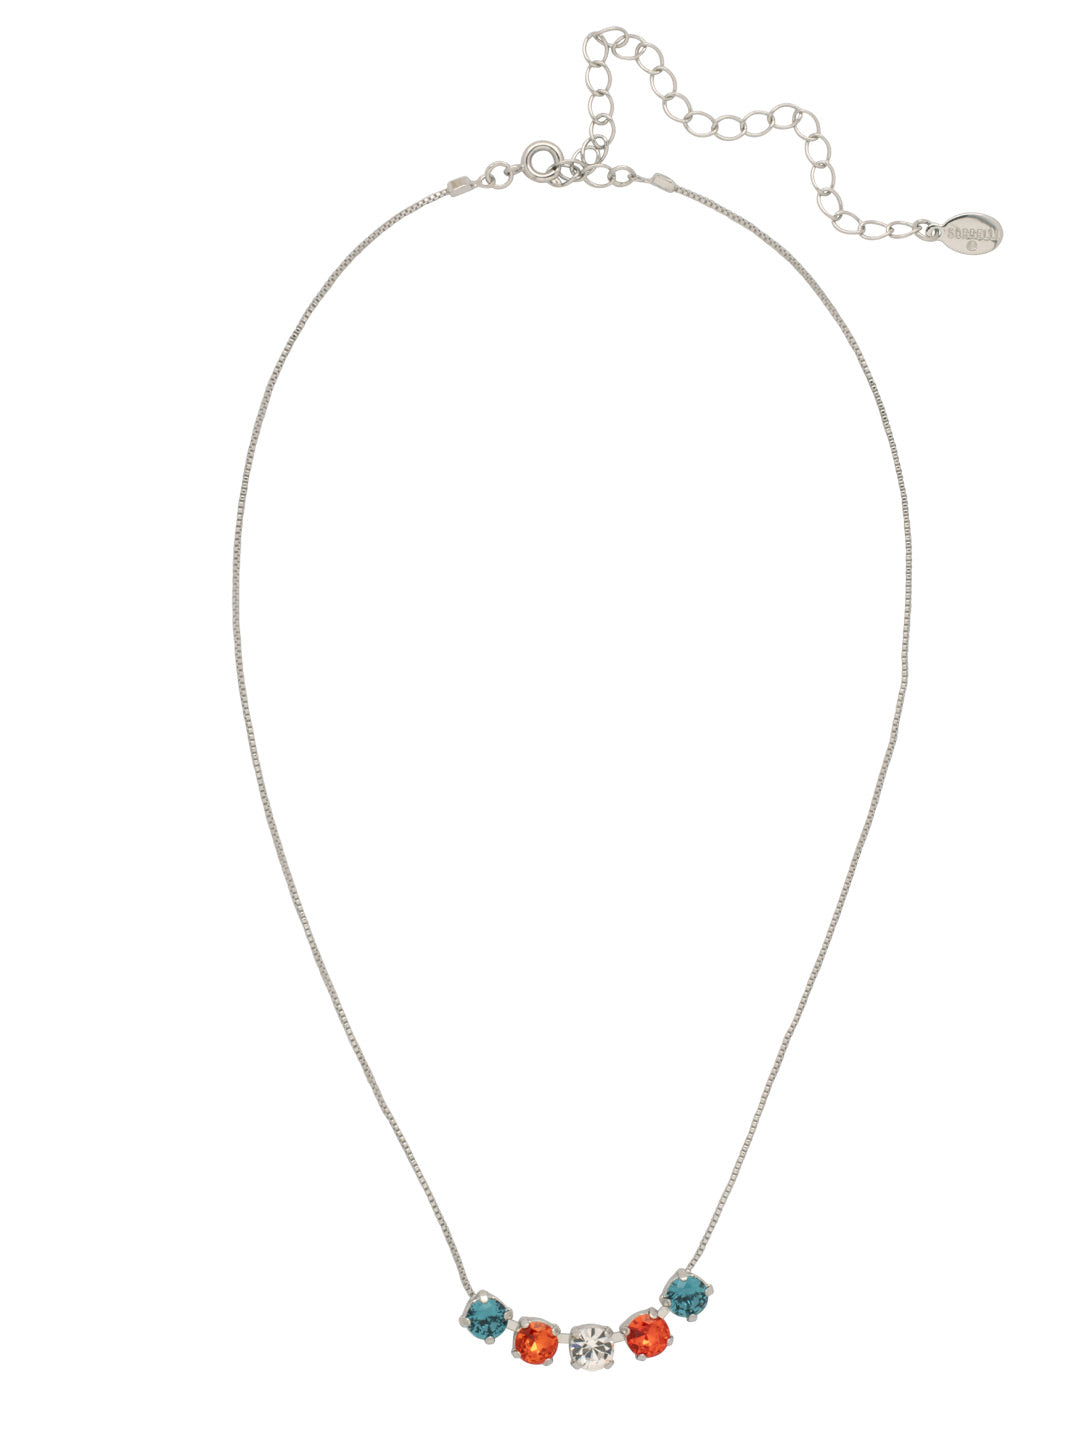 Shaughna Tennis Necklace - NFC84PDBTB - <p>The Shaughna Tennis Necklace features five crystals on a delicate adjustable chain. From Sorrelli's Battle Blue collection in our Palladium finish.</p>